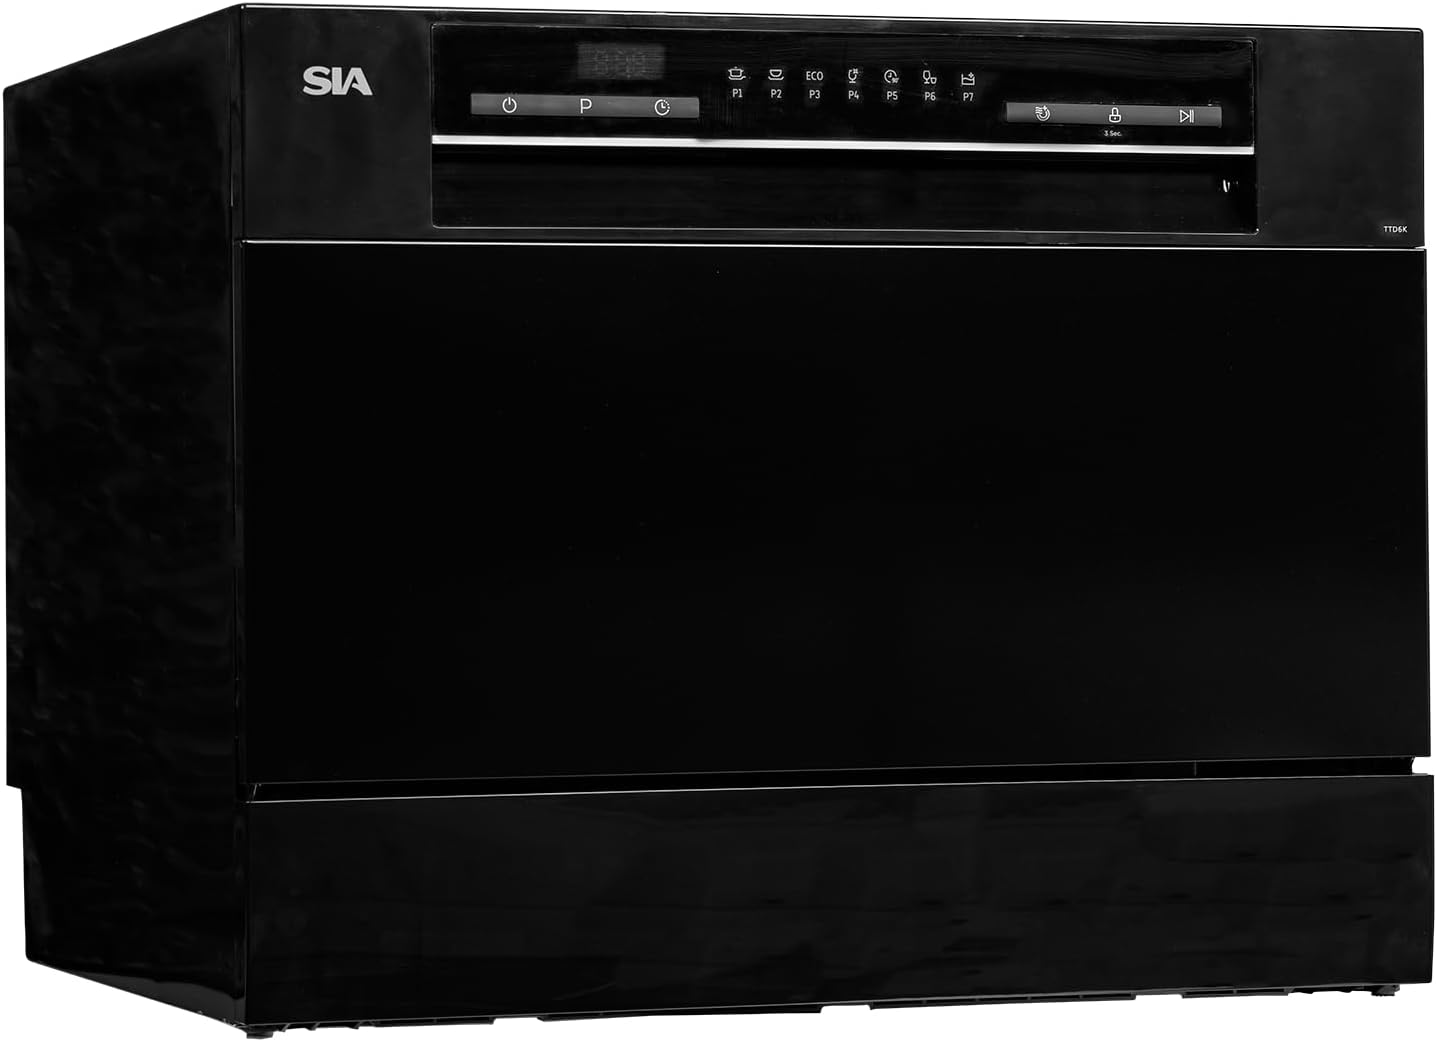 Table Top Dishwasher In Black, 6 Places 6 Programmes LED Display 24 Hour Delay Start W55 x D50 x H43.8cm - SIA TTD6K - Amazing Gadgets Outlet